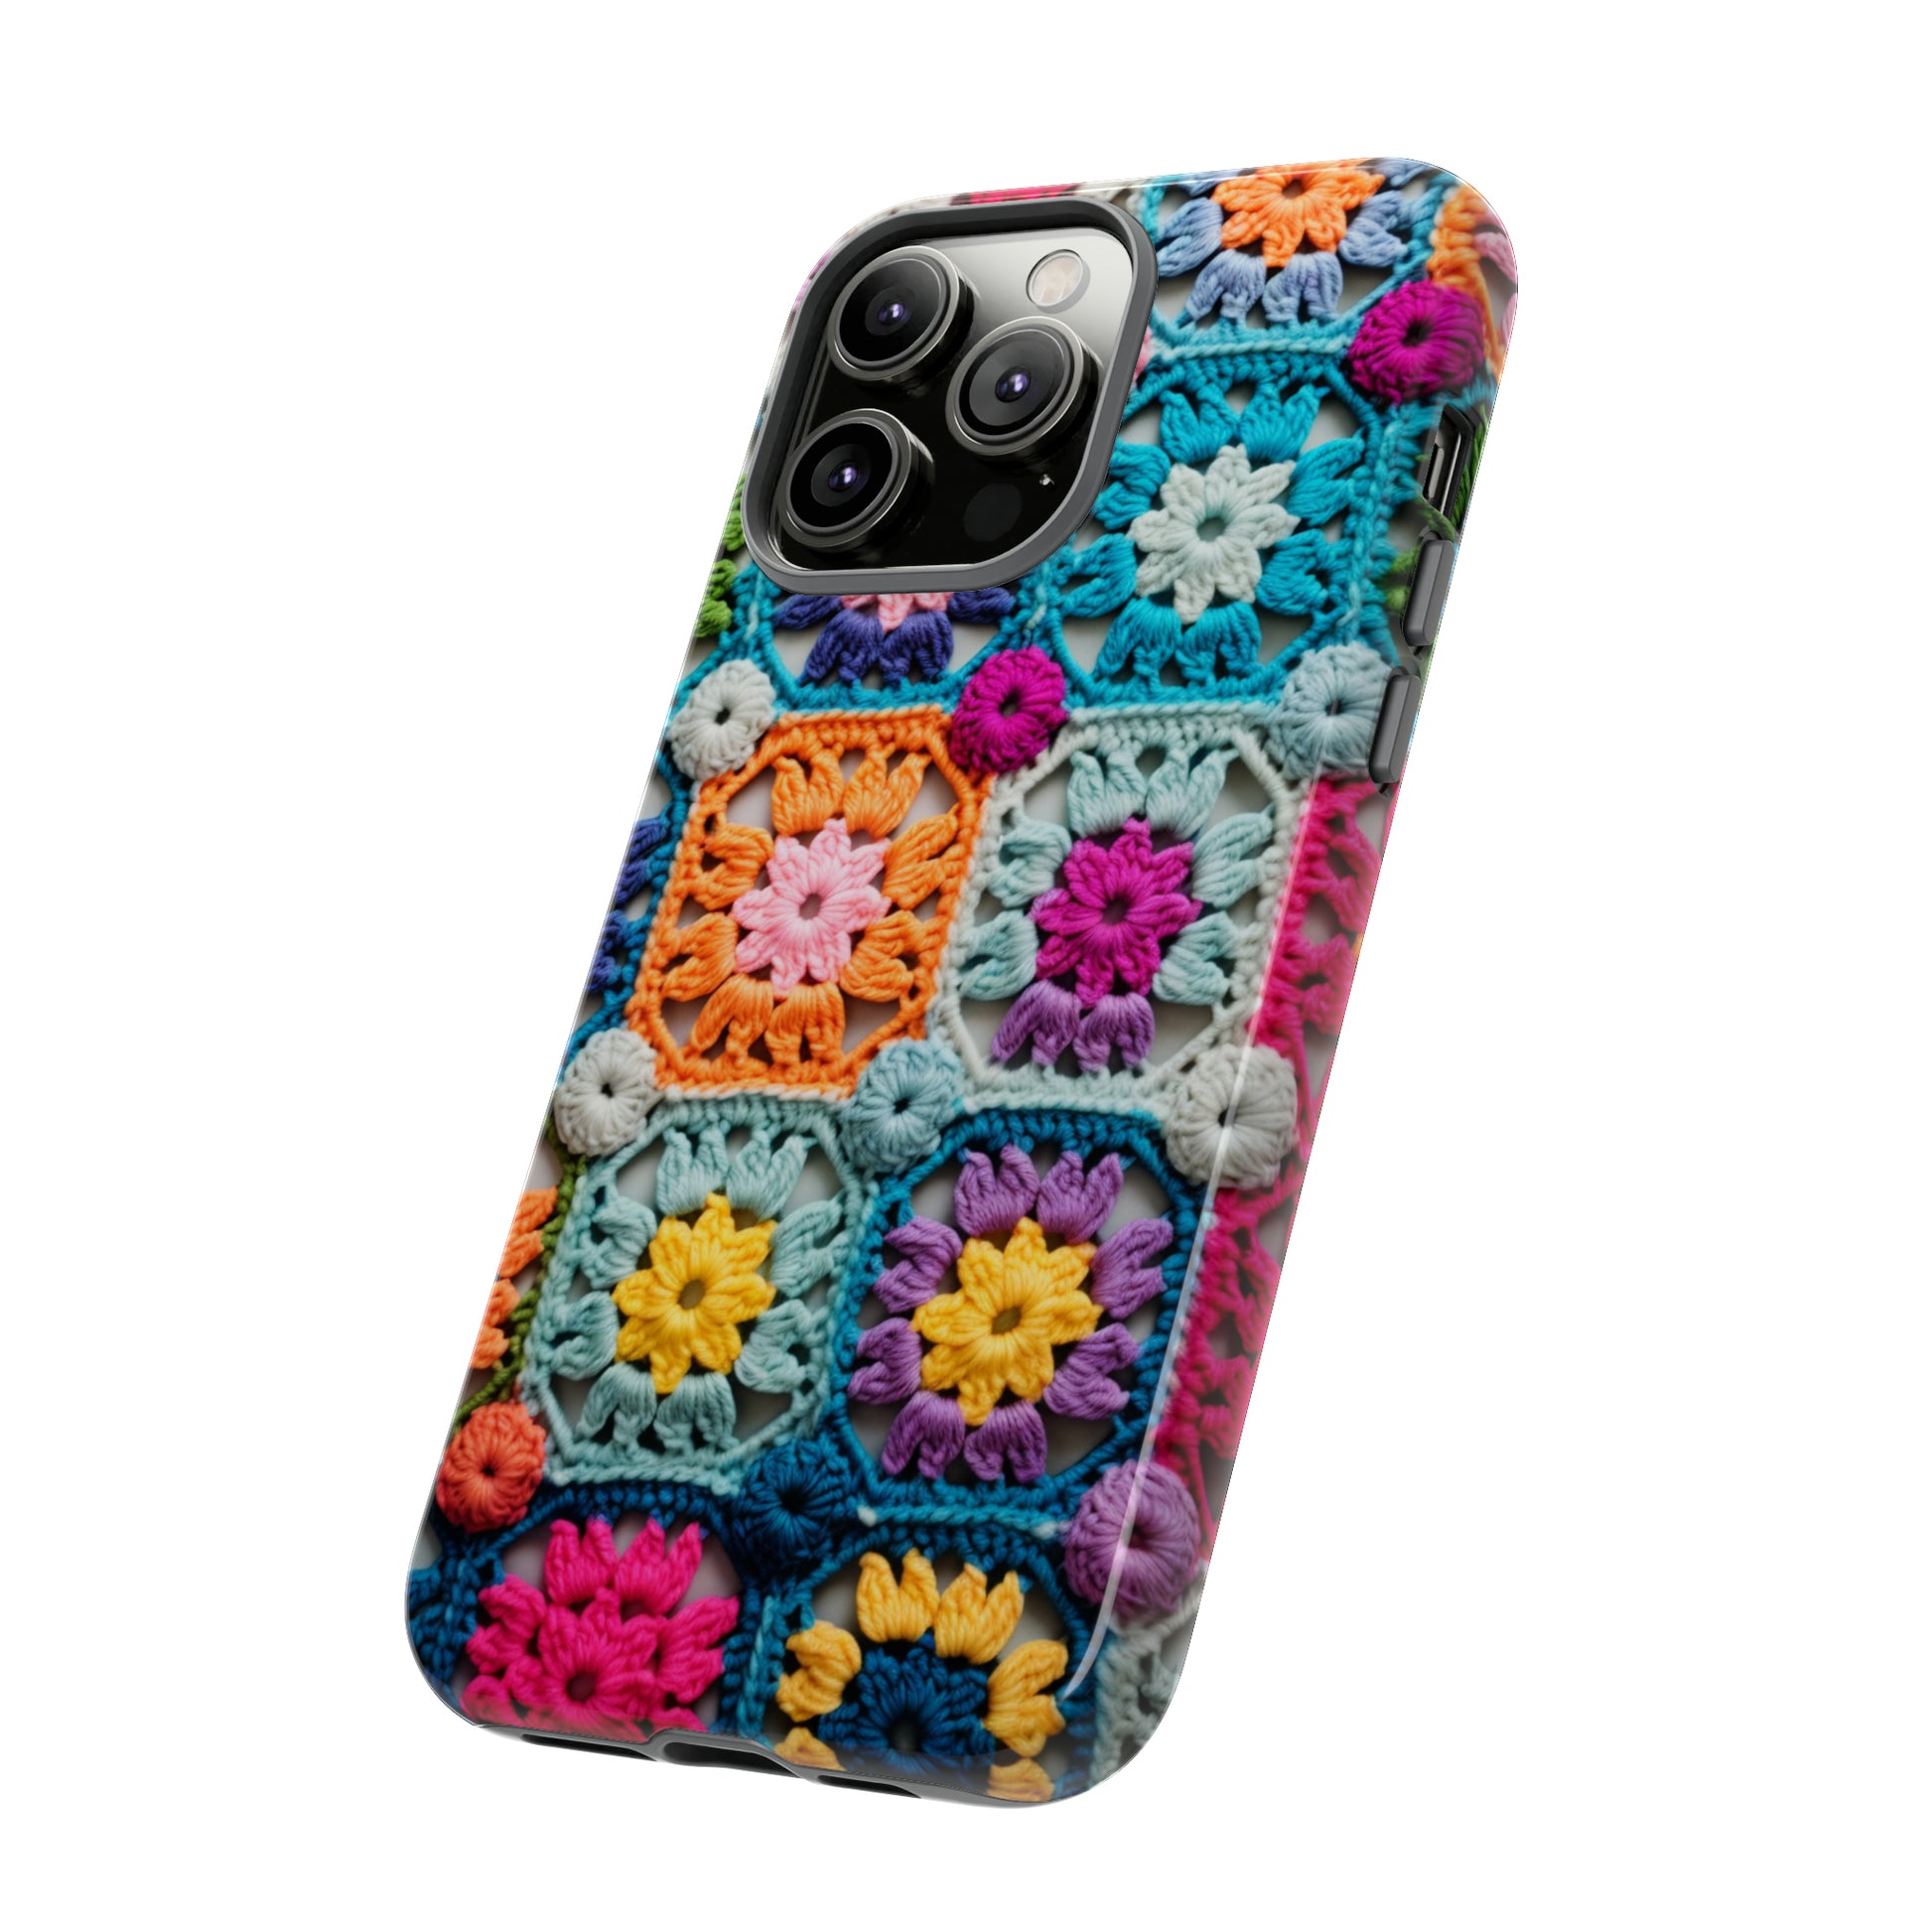 Handcrafted knit look cover for Samsung smartphone